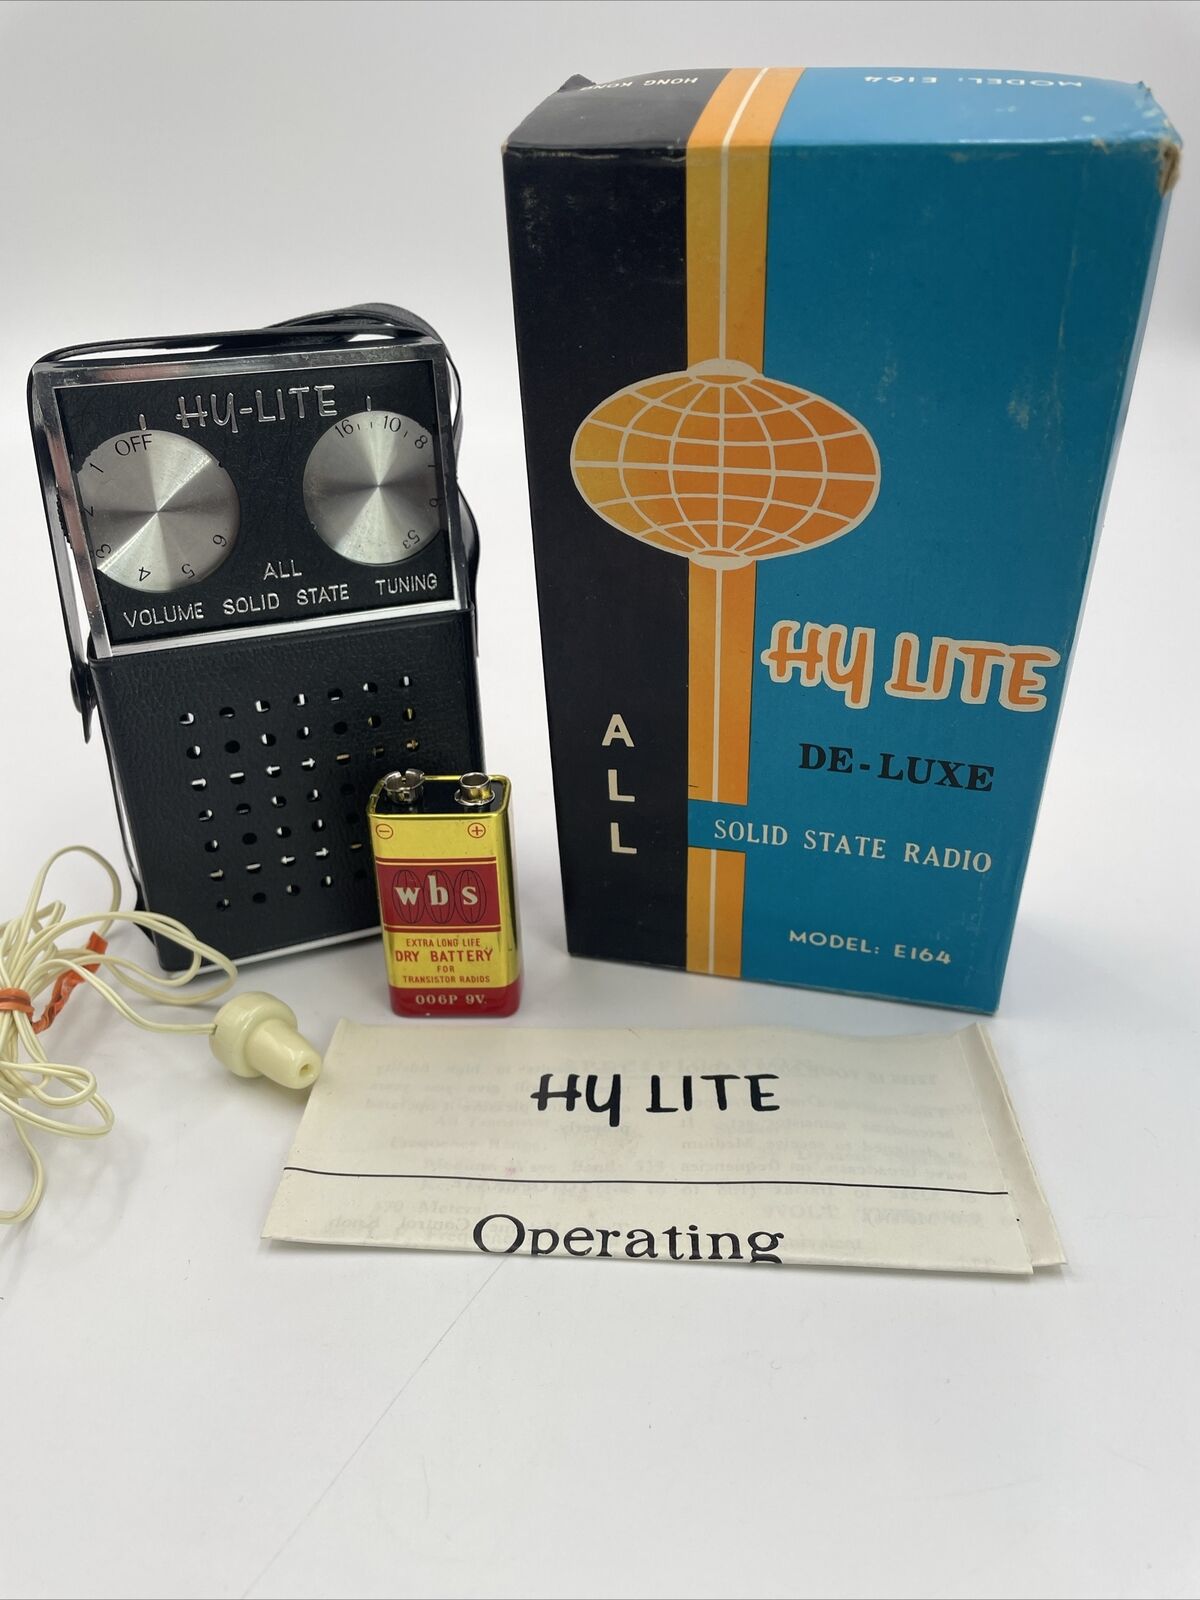 Hy Lite All Solid State Radio De-Luxe E164 Transistor With Box Tested Works